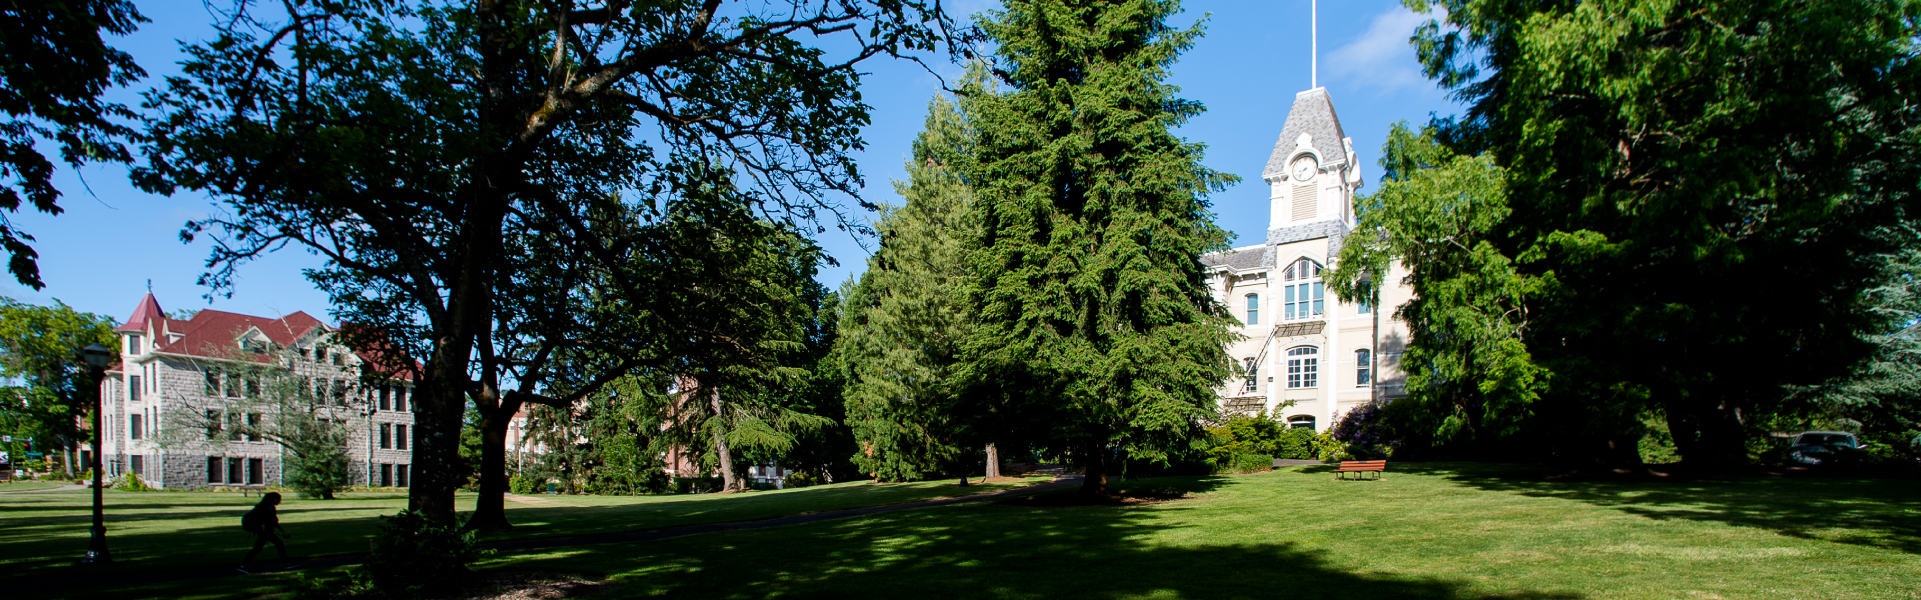 Scenic view of grass and Benton building